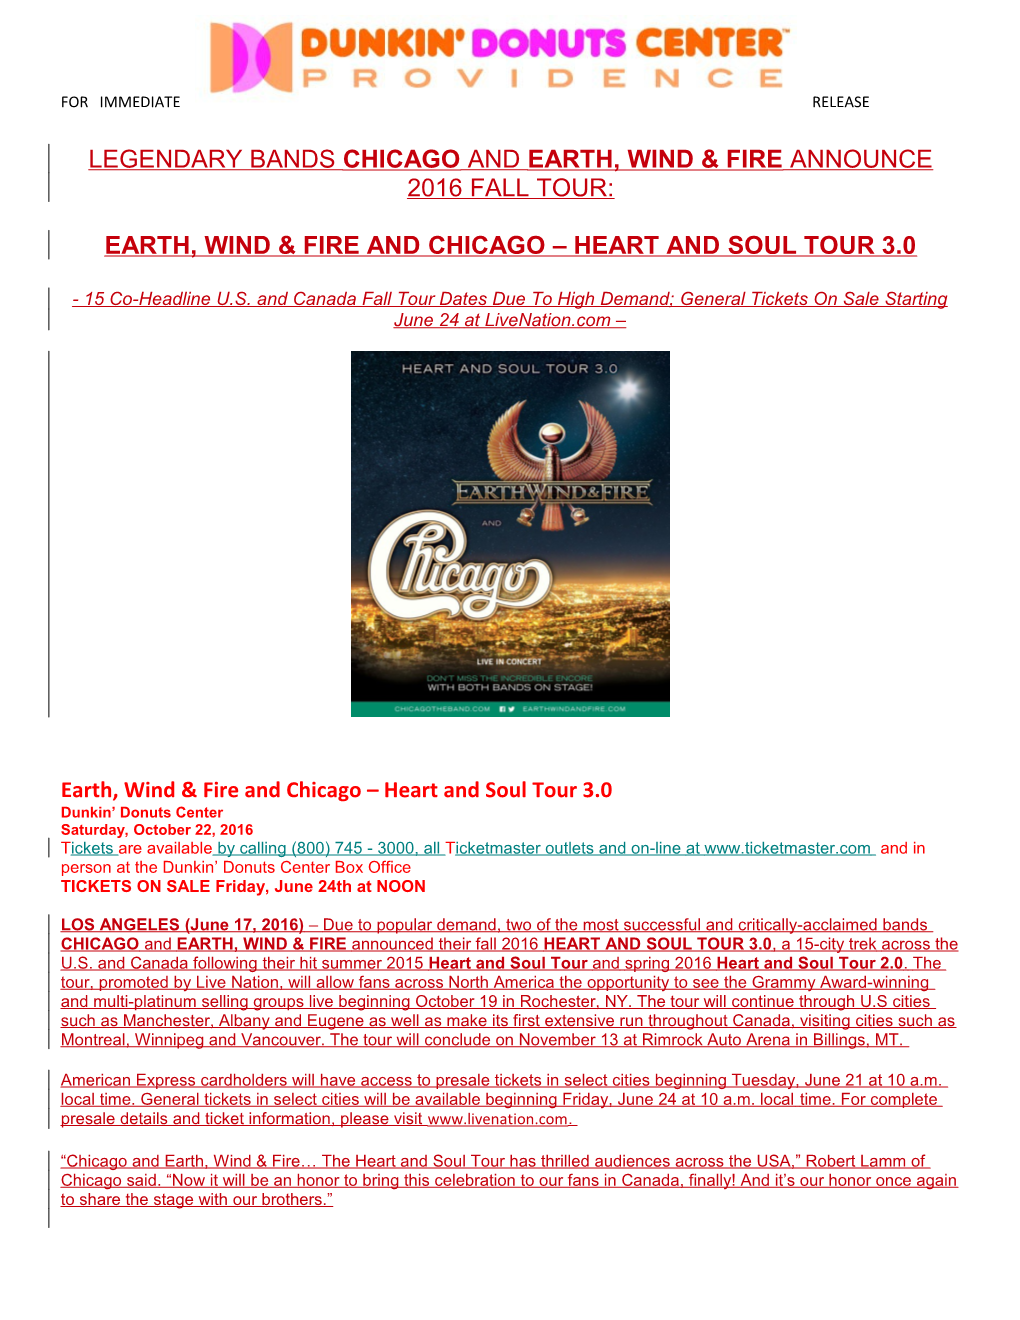 Earth, Wind & Fire and Chicago Heart and Soul Tour 3.0